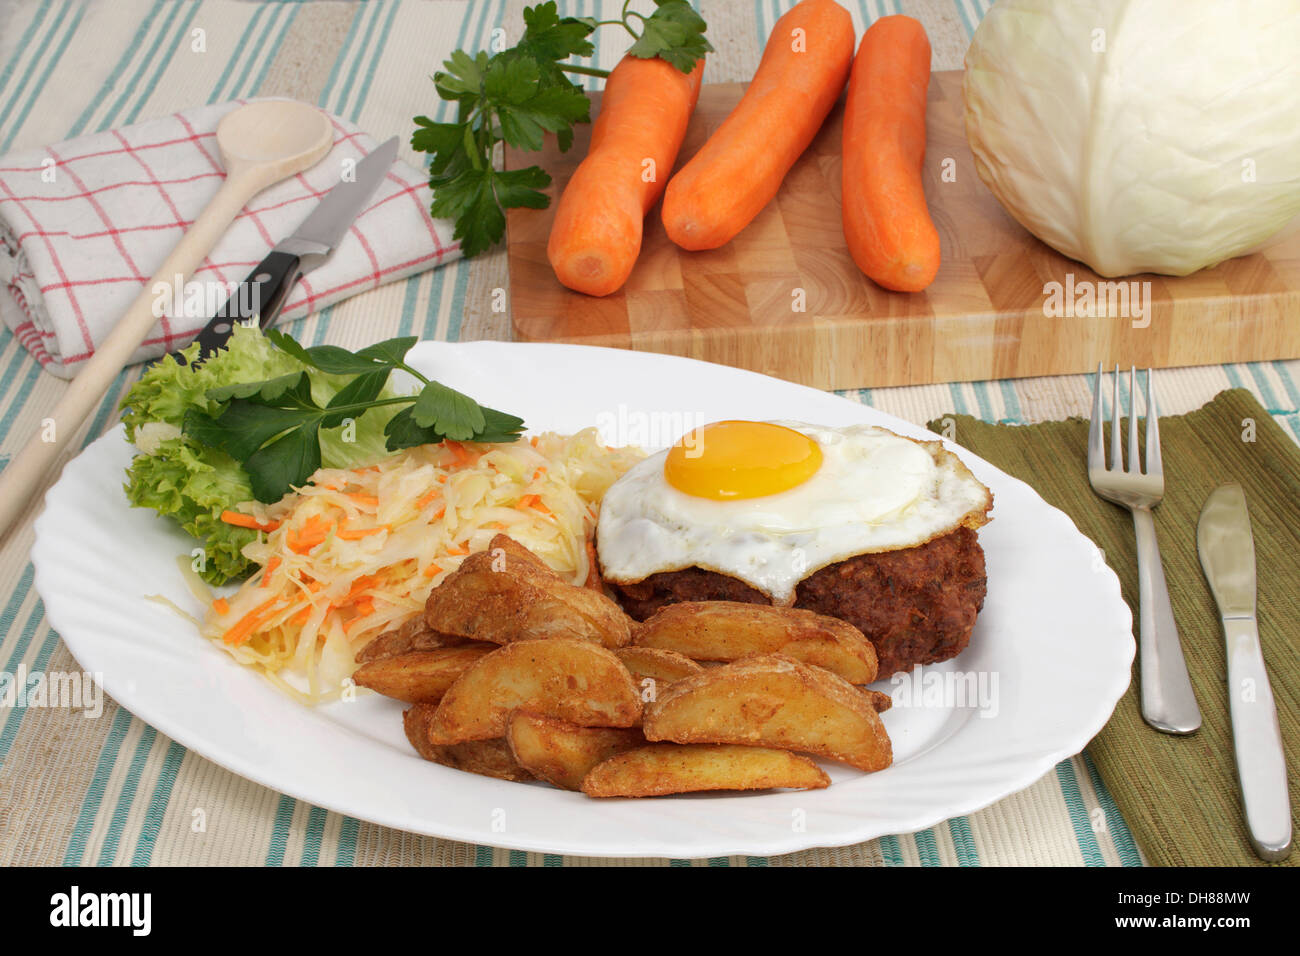 Farmers meat ball, hamburger steak, fried egg, baked potatoe wedges, coleslaw, carrots, white cabbage and flat leaf parsley on Stock Photo